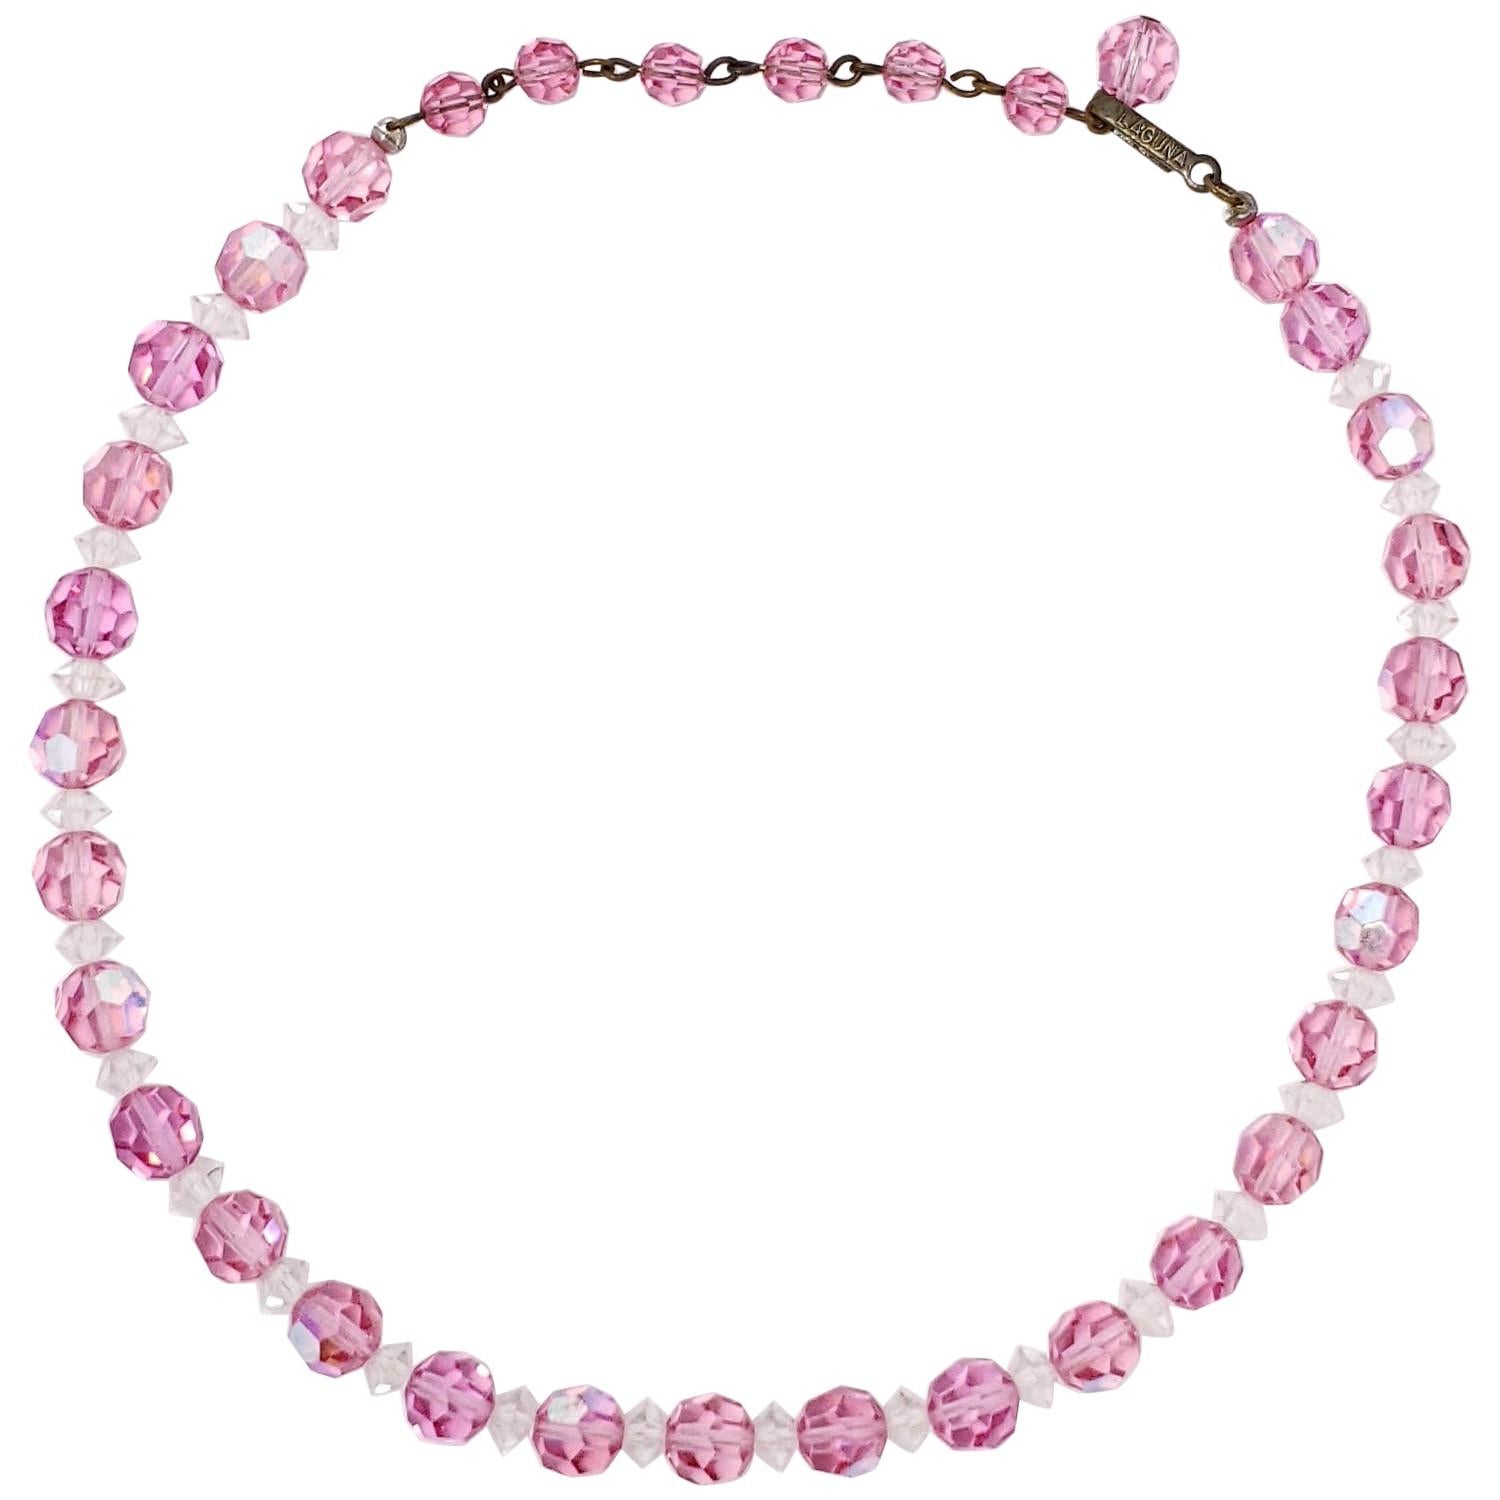 Laguna Pink Rose Faceted Crystal Bead Necklace with Vintage Brass Hook Clasp